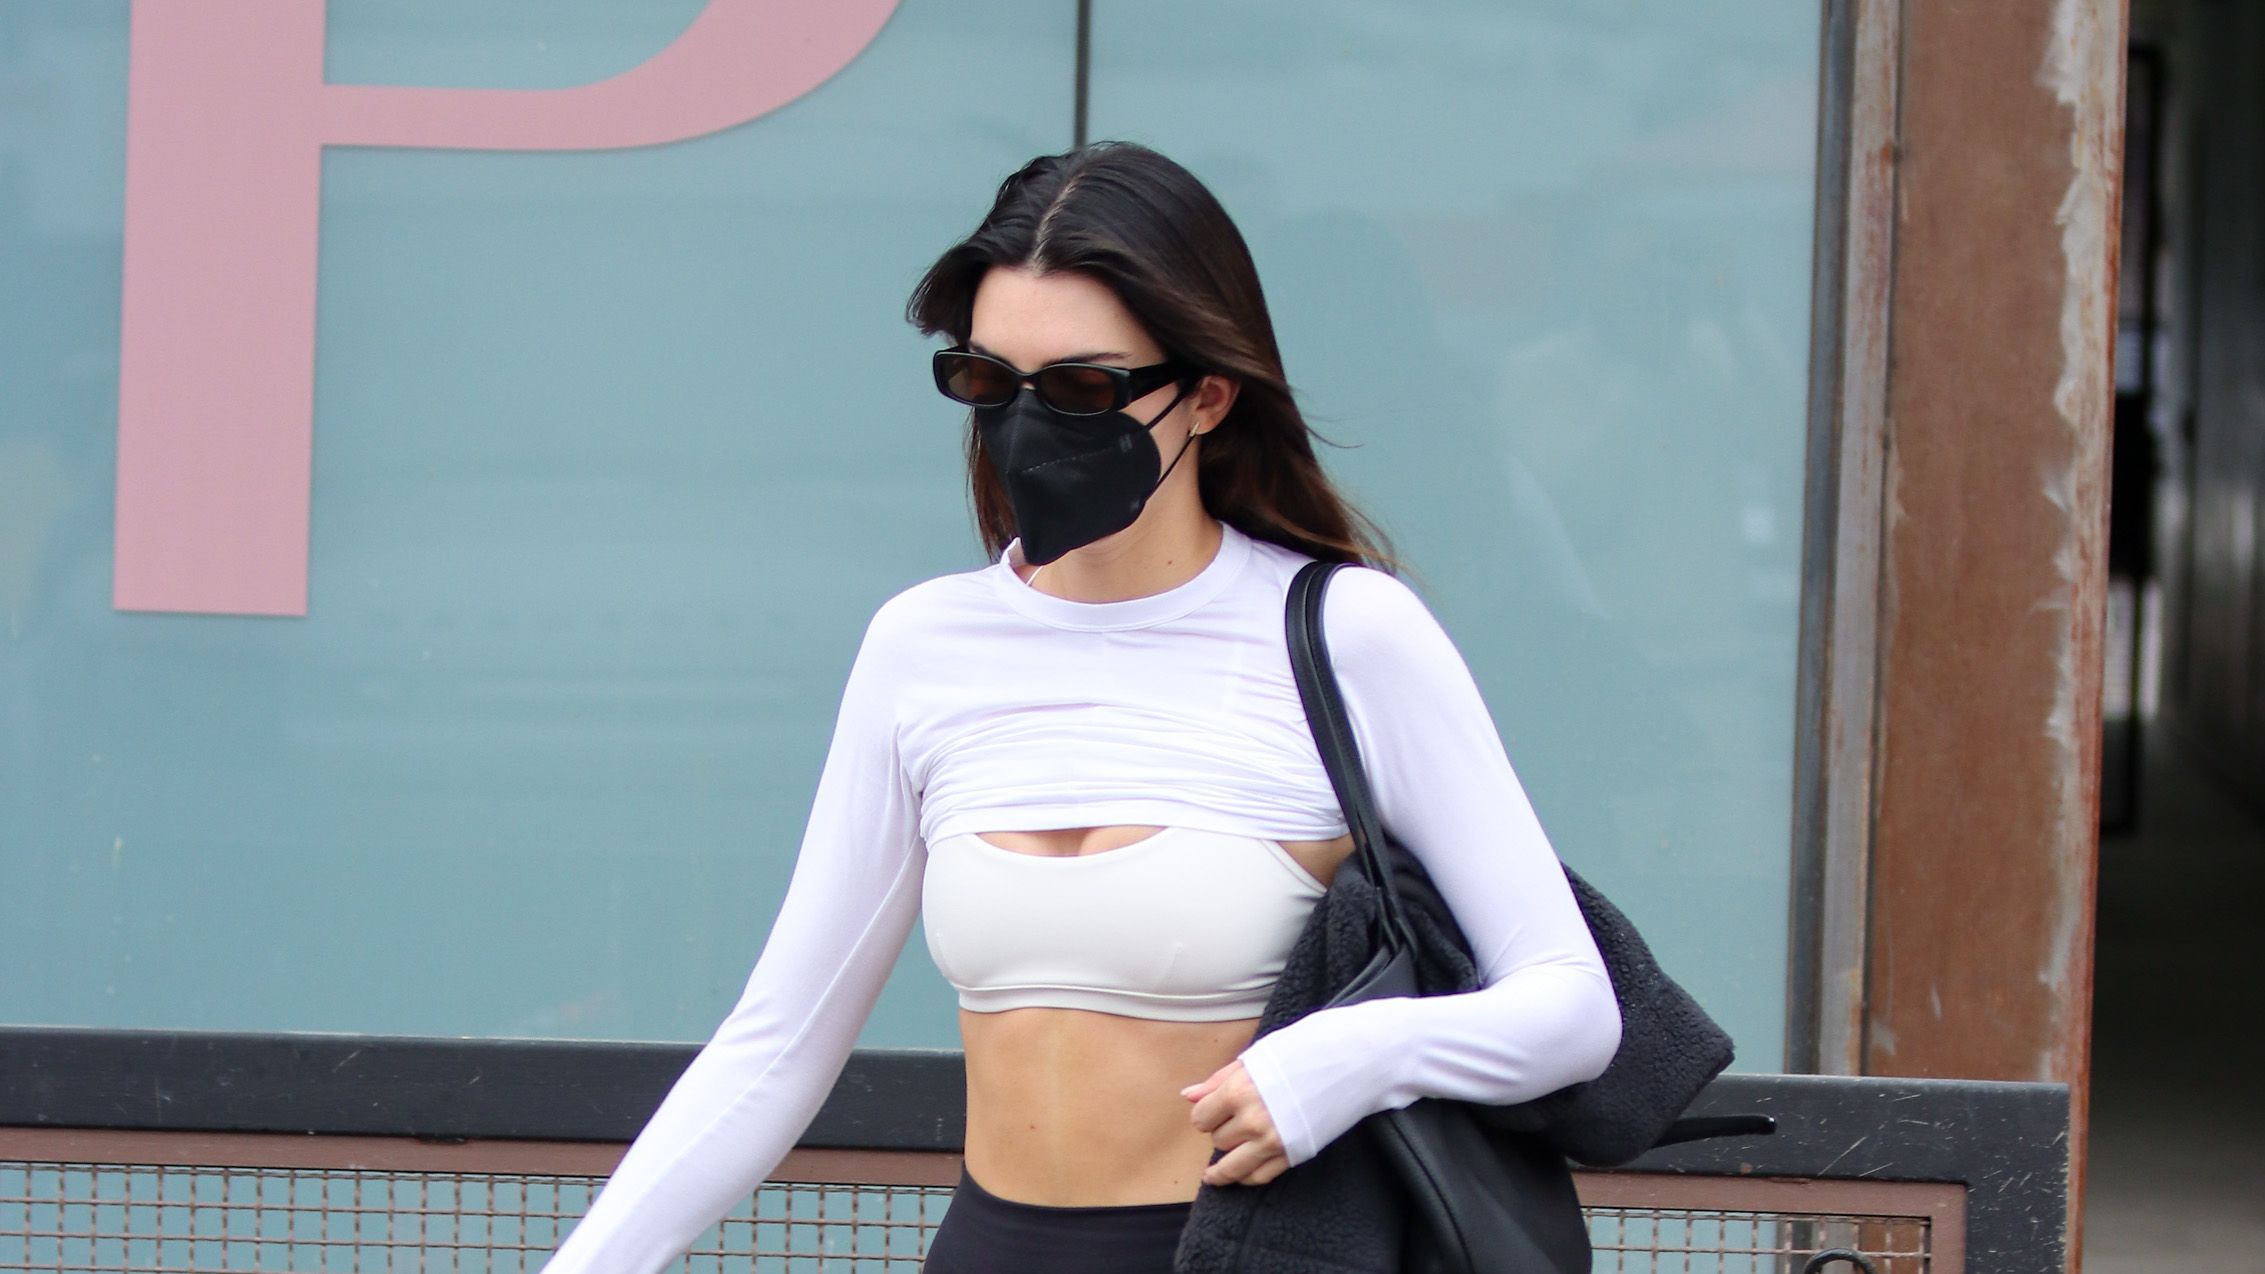 Kendall Jenner Has the Tiniest Gym Bag Ever